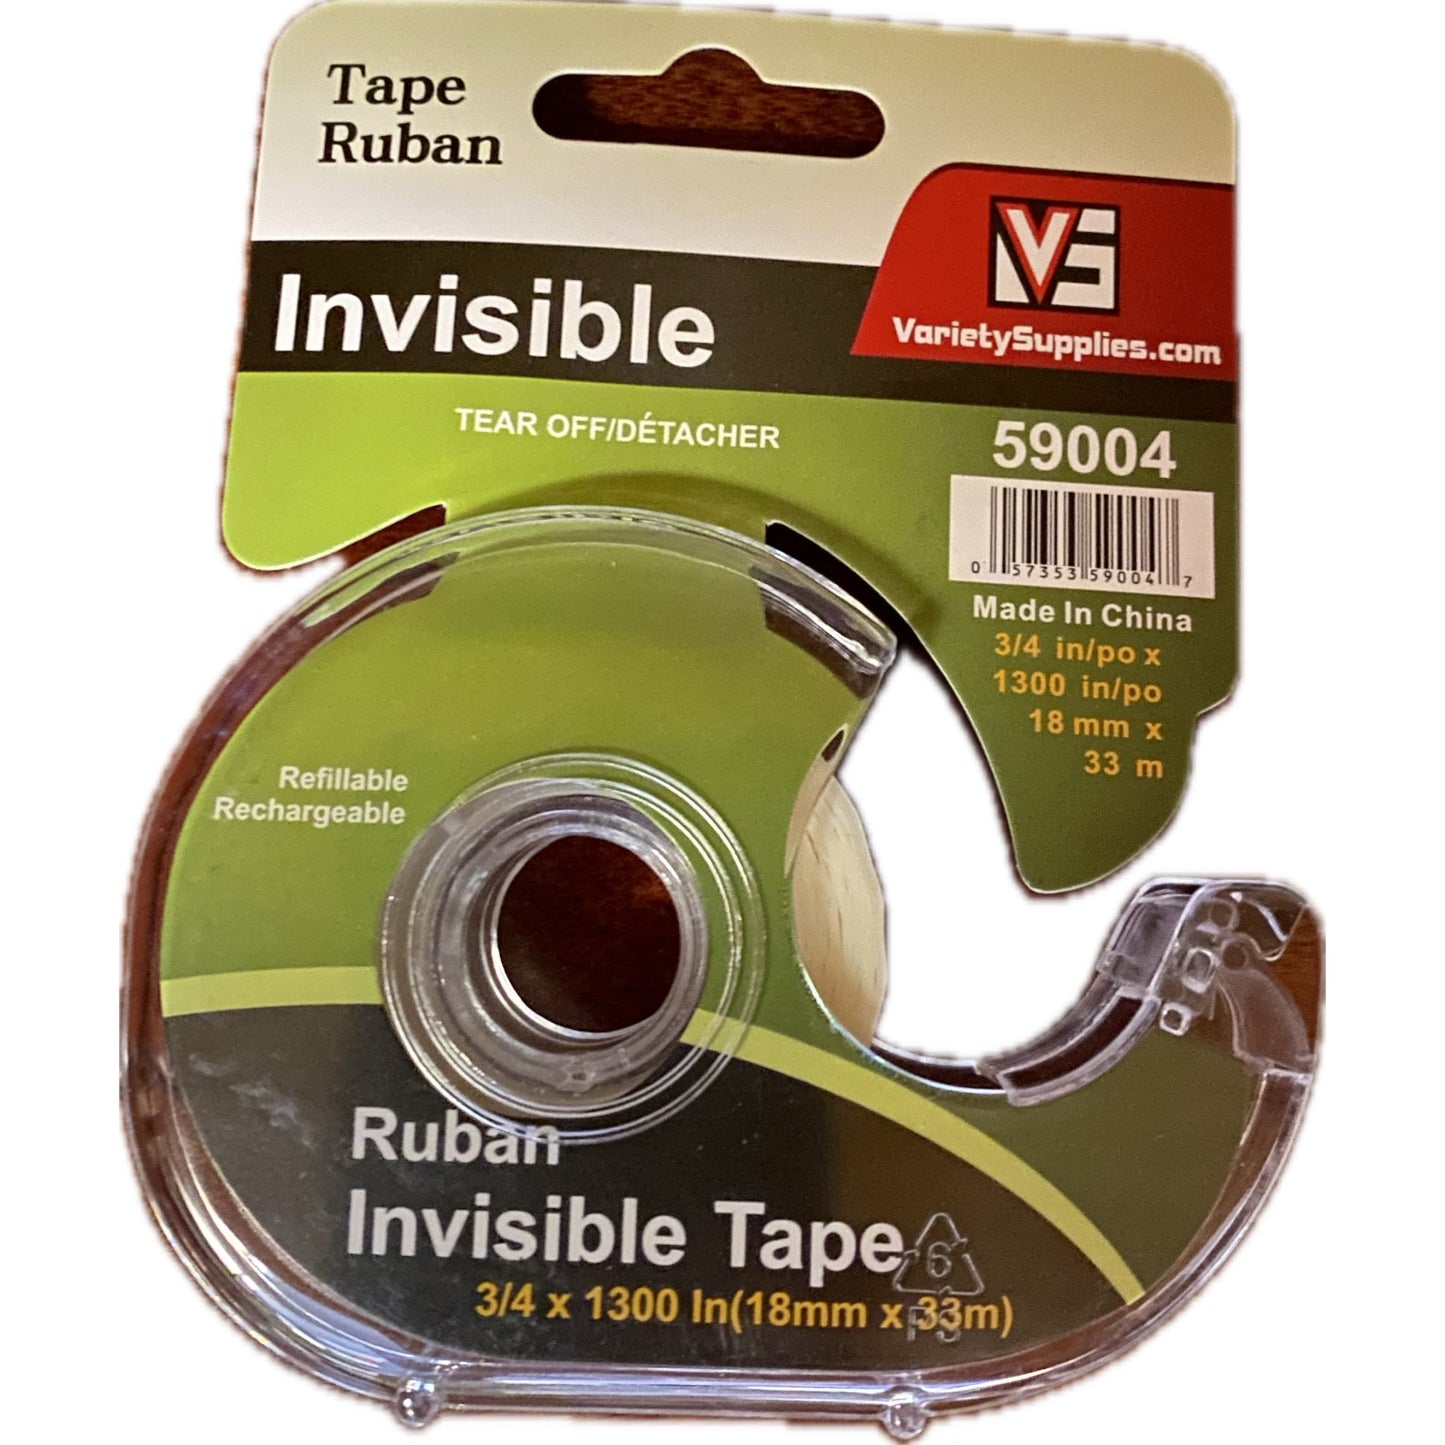 Variety Supplies Invisible Tape Invisible Tape - Sabat Deals057353590047